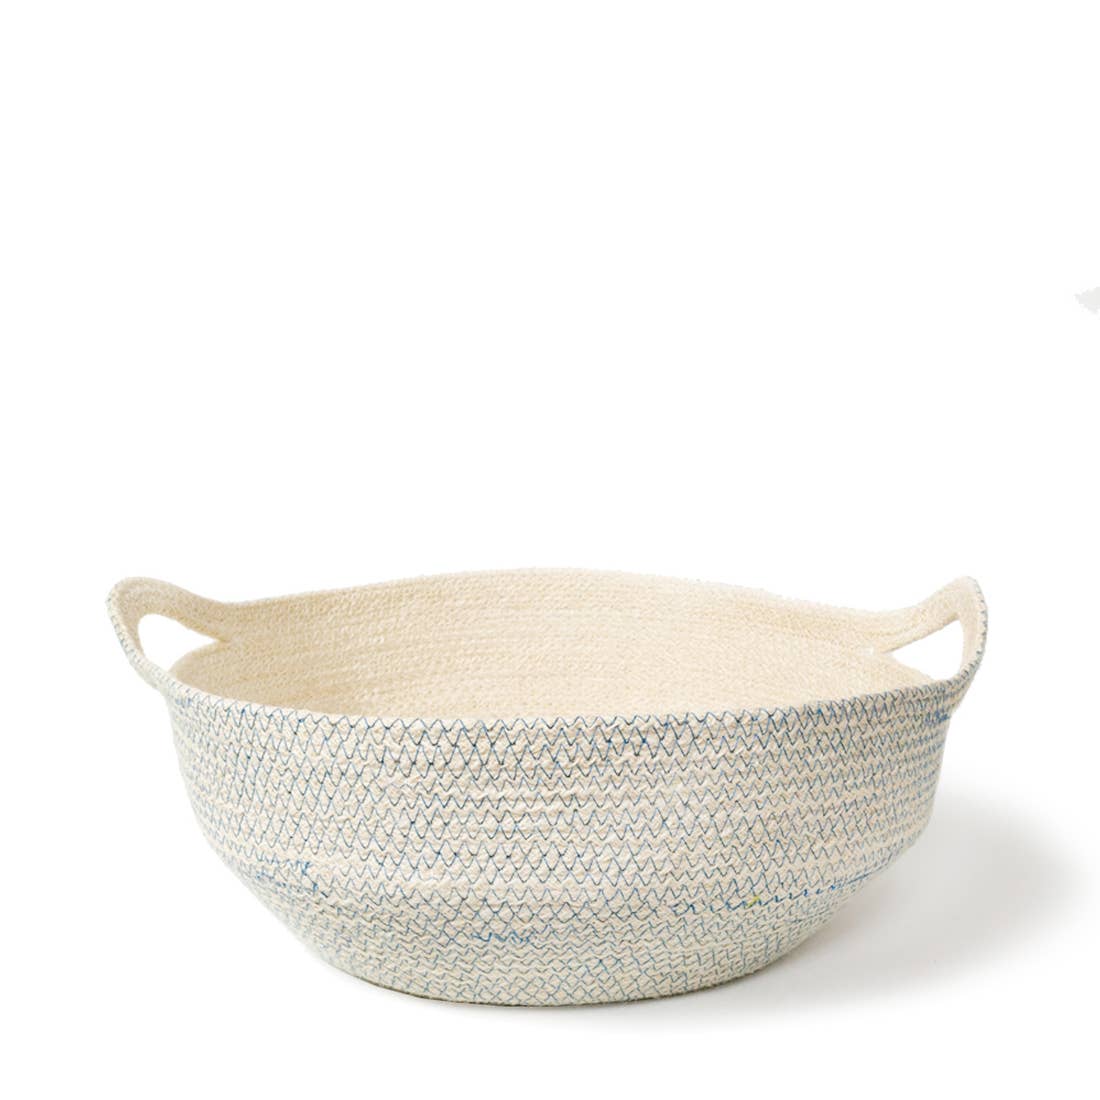 Fair Trade Sustainably Handwoven Eco-friendly Jute Baskets